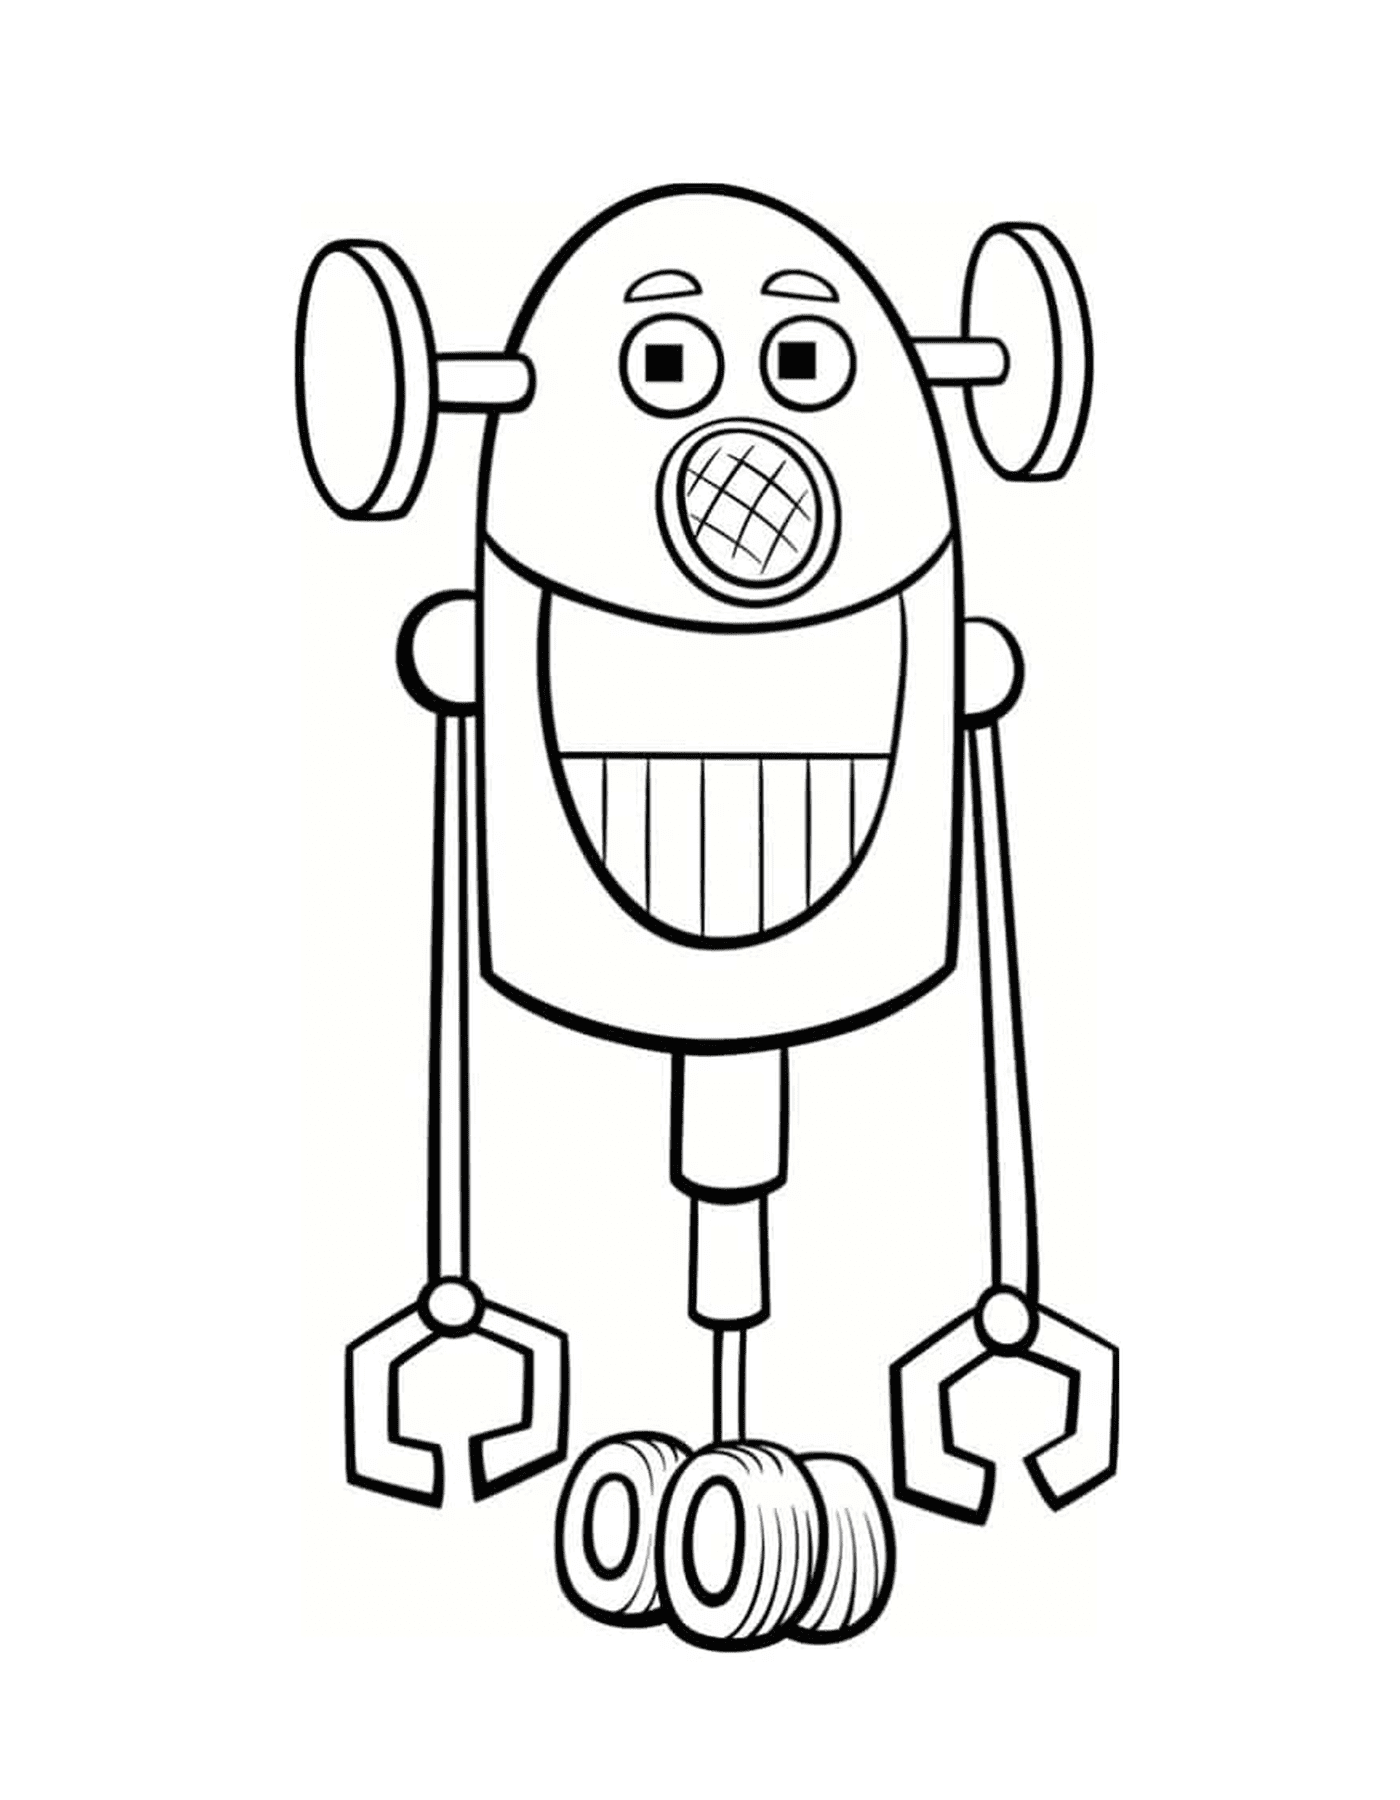  Funny robot with big smile 